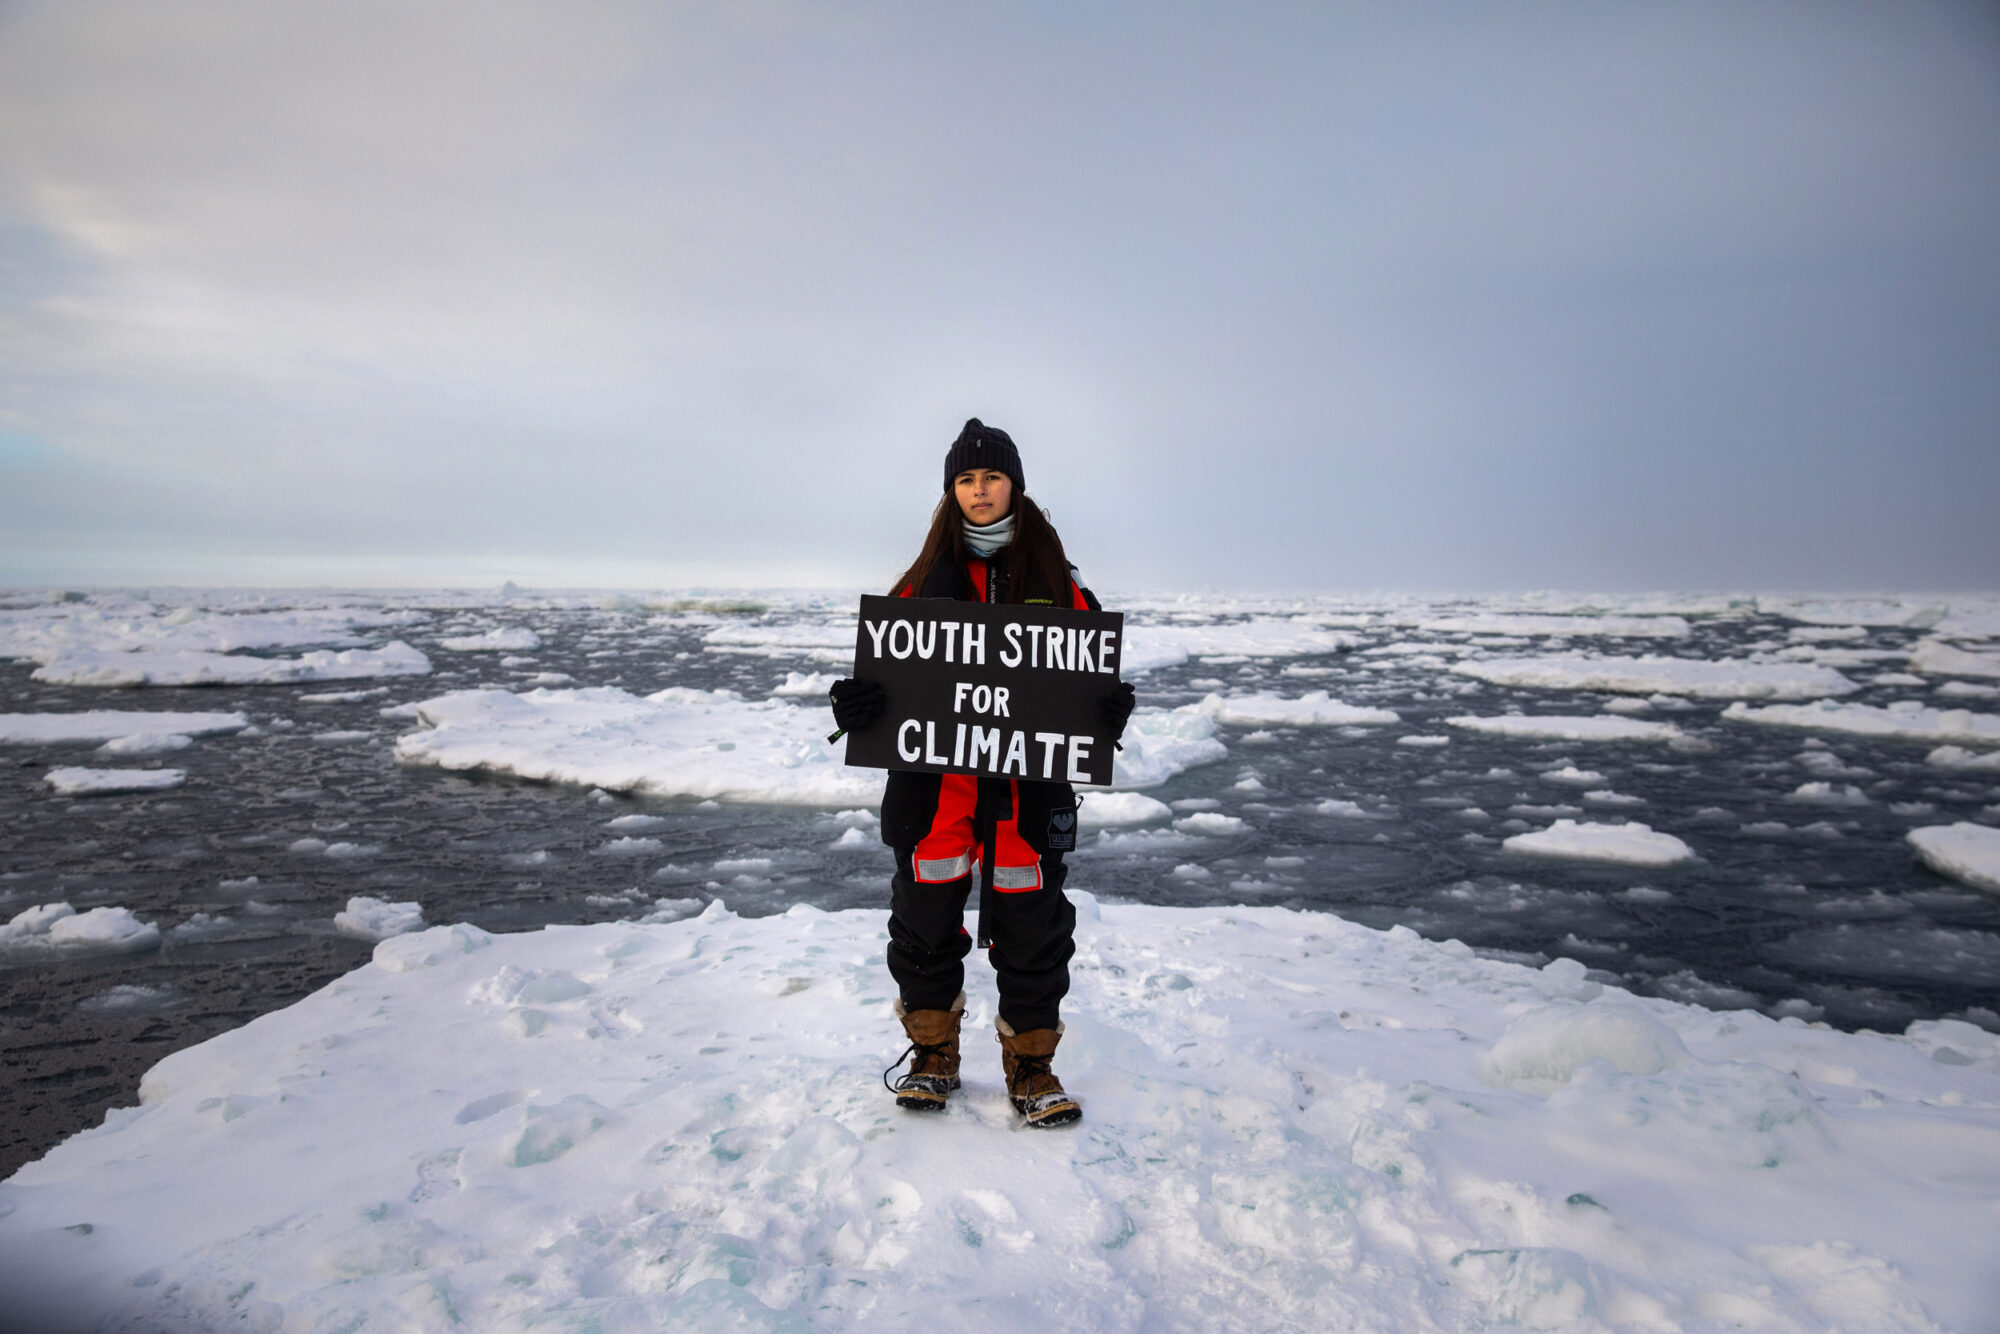 Mya-Rose Craig standing on ice holding a sign reading 'Youth strike for climate'